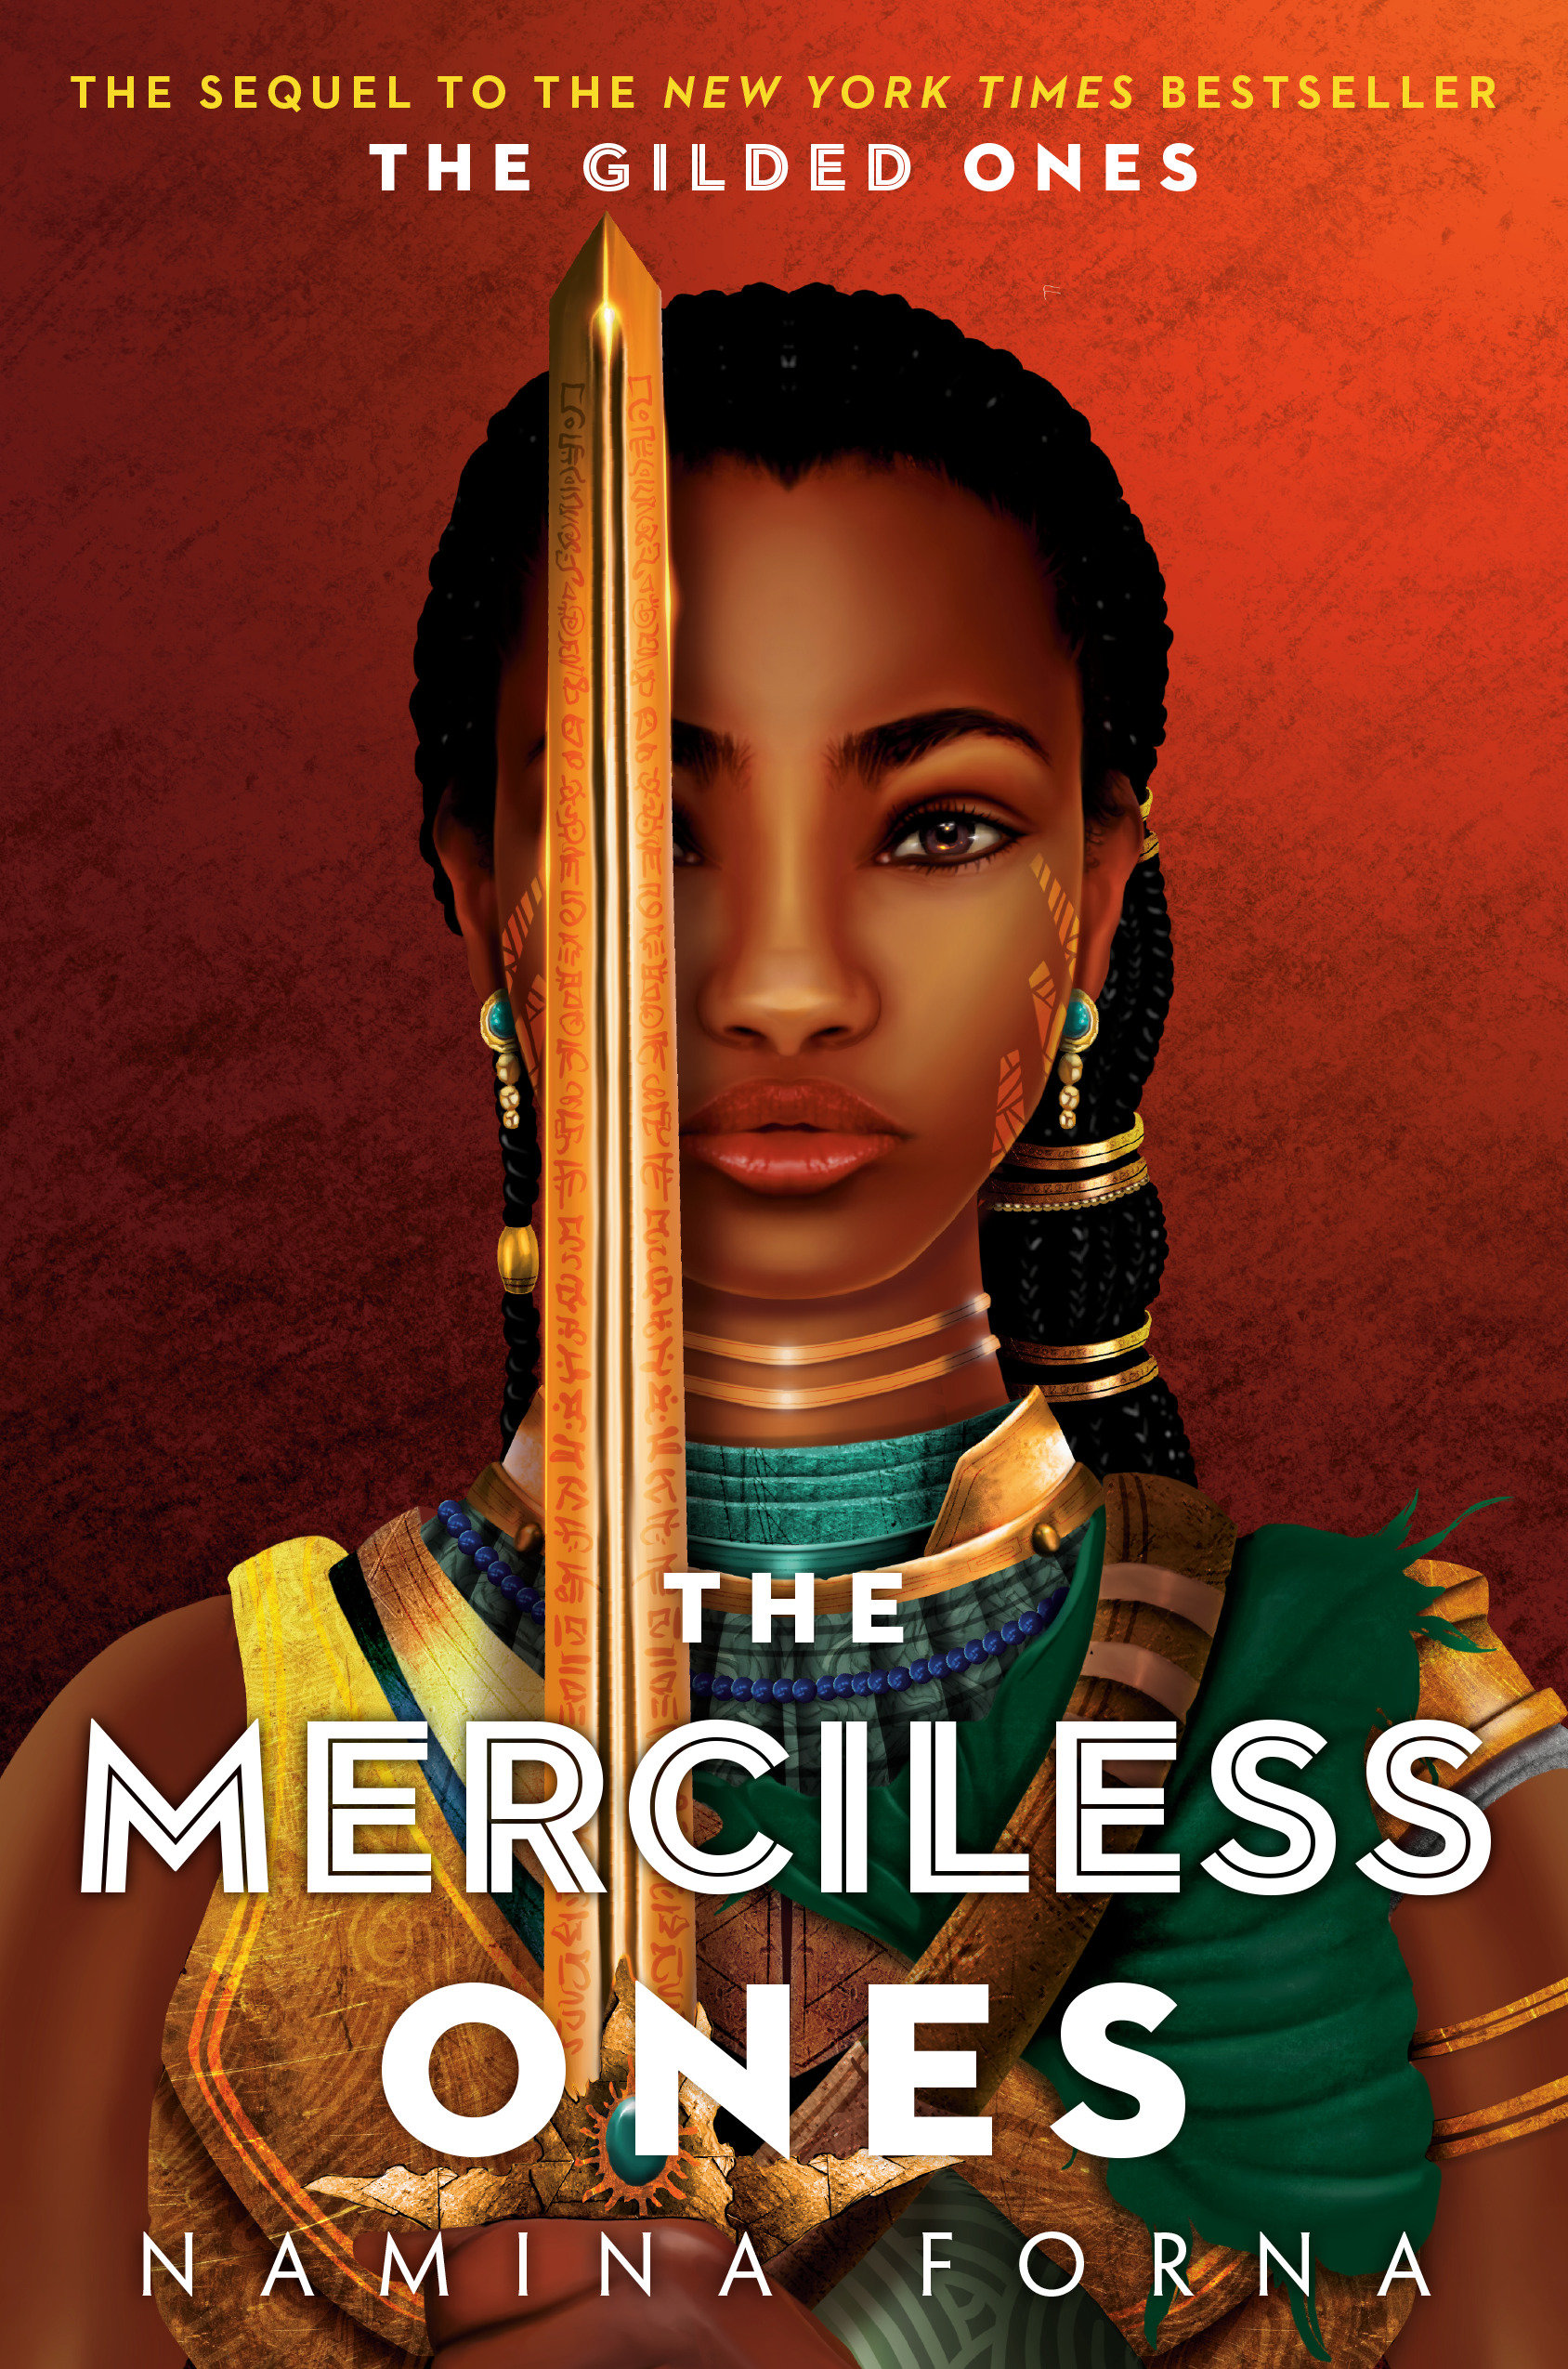 The Gilded Ones #2: The Merciless Ones (Hardcover Book)